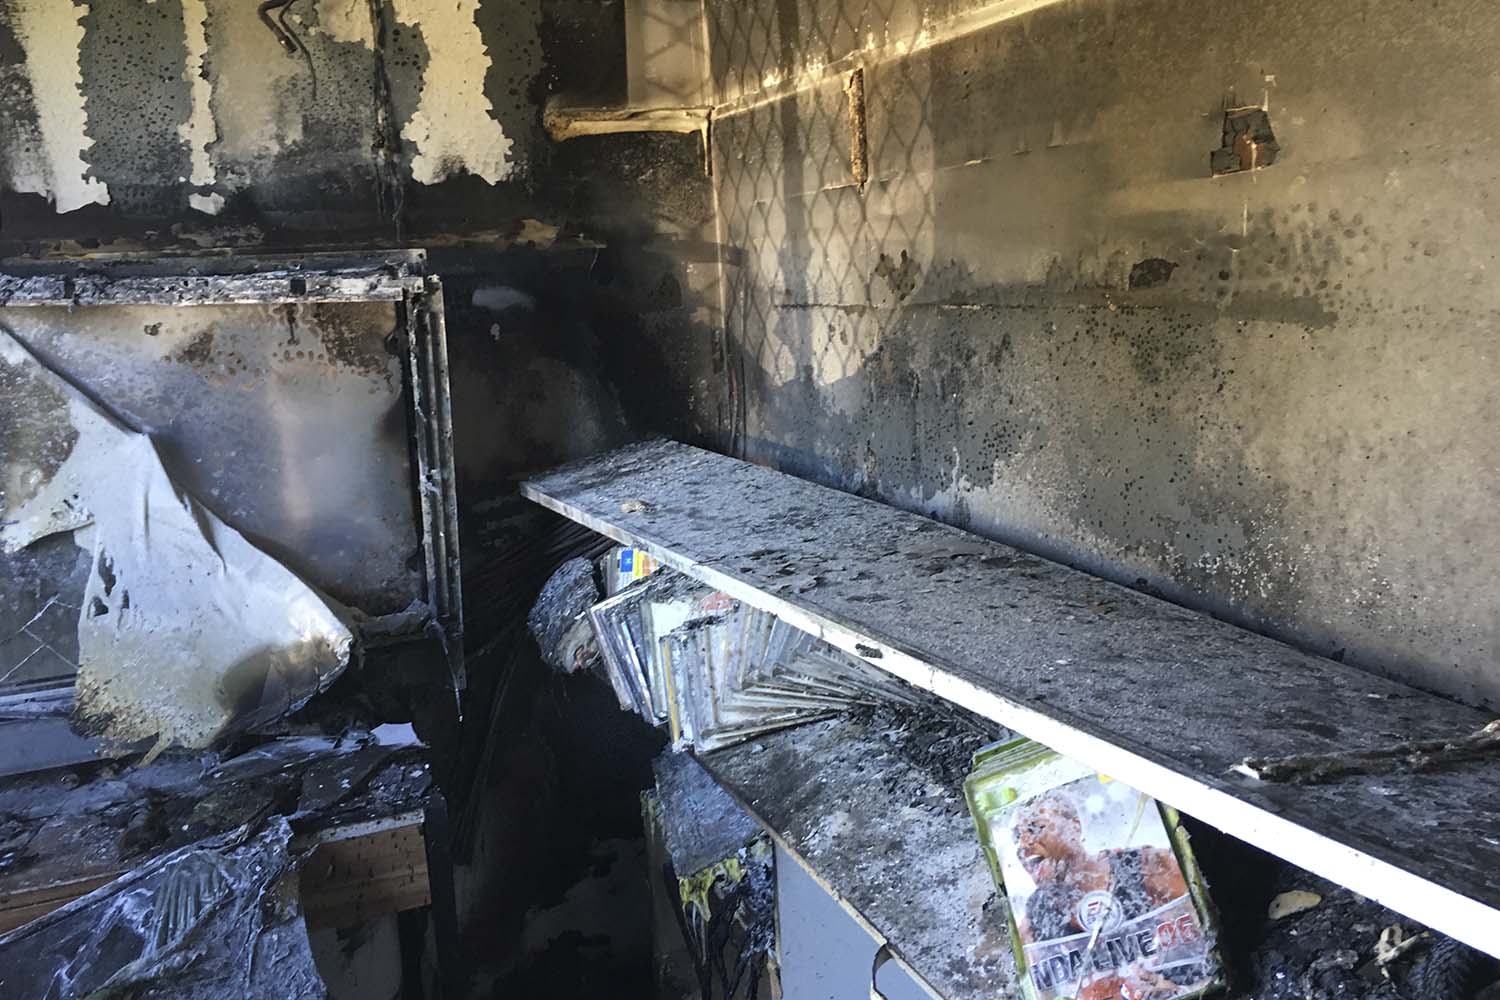 Fire damaged contents within a home.